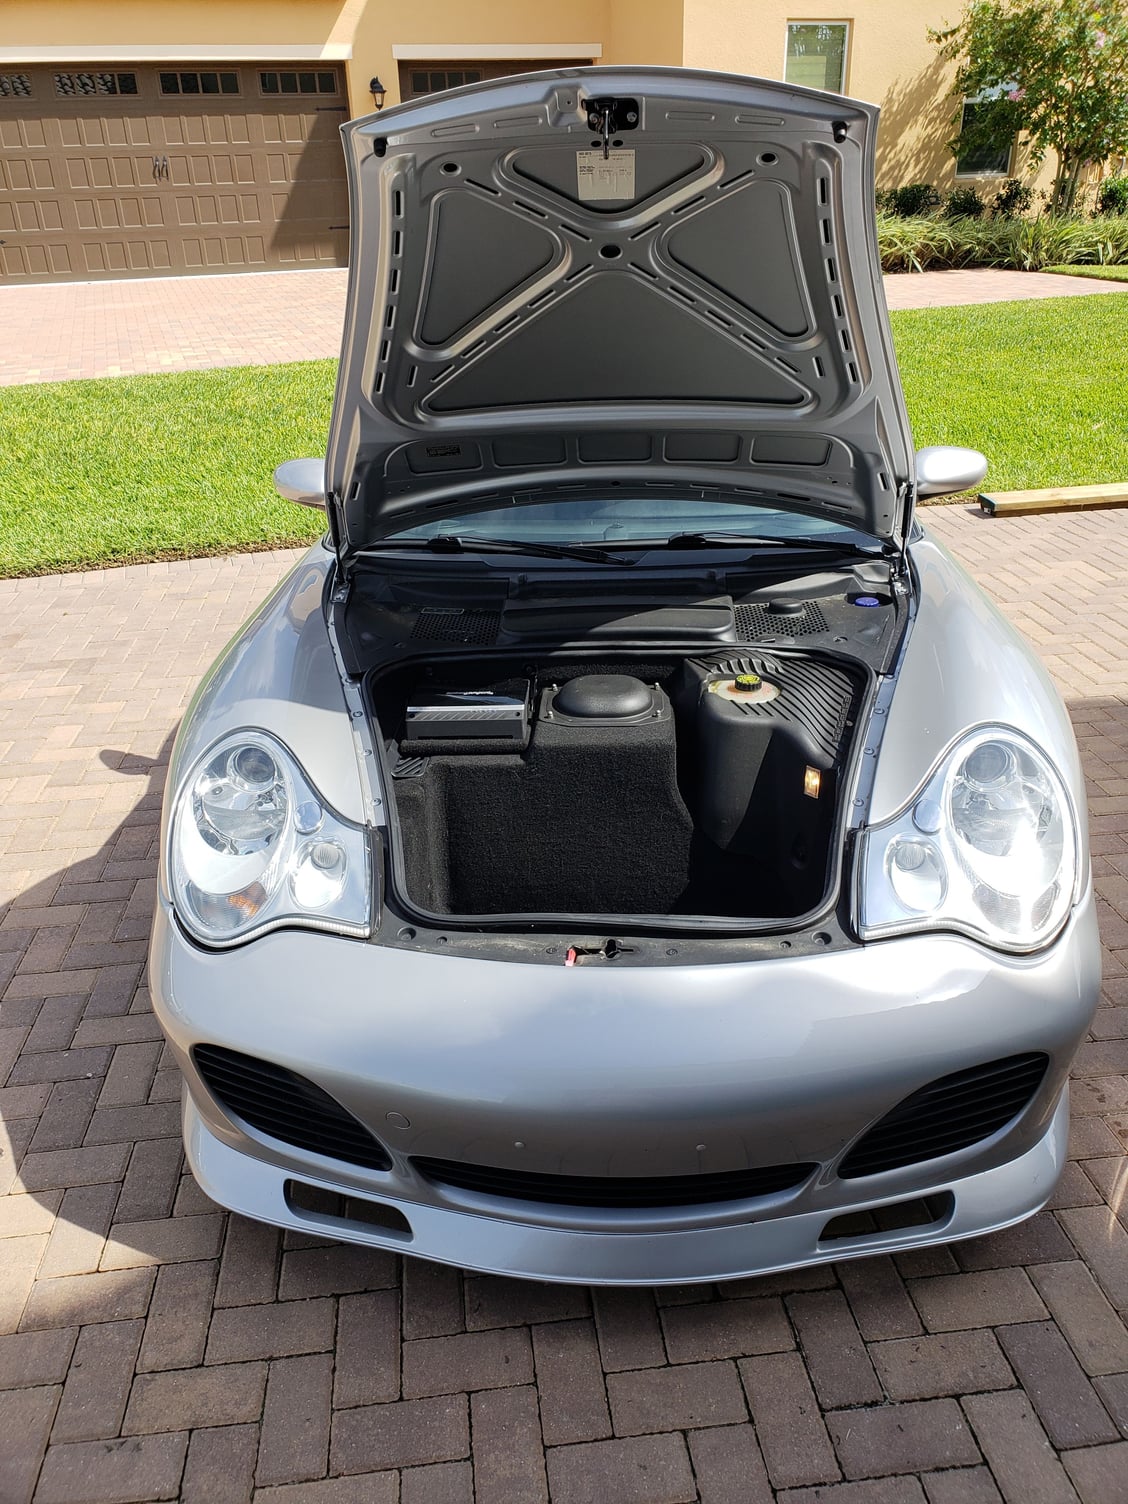 2003 Porsche 911 - 2003 996TT - Used - VIN wp0ab29943s686581 - 38,300 Miles - 6 cyl - AWD - Manual - Coupe - Silver - Winter Garden, FL 34787, United States